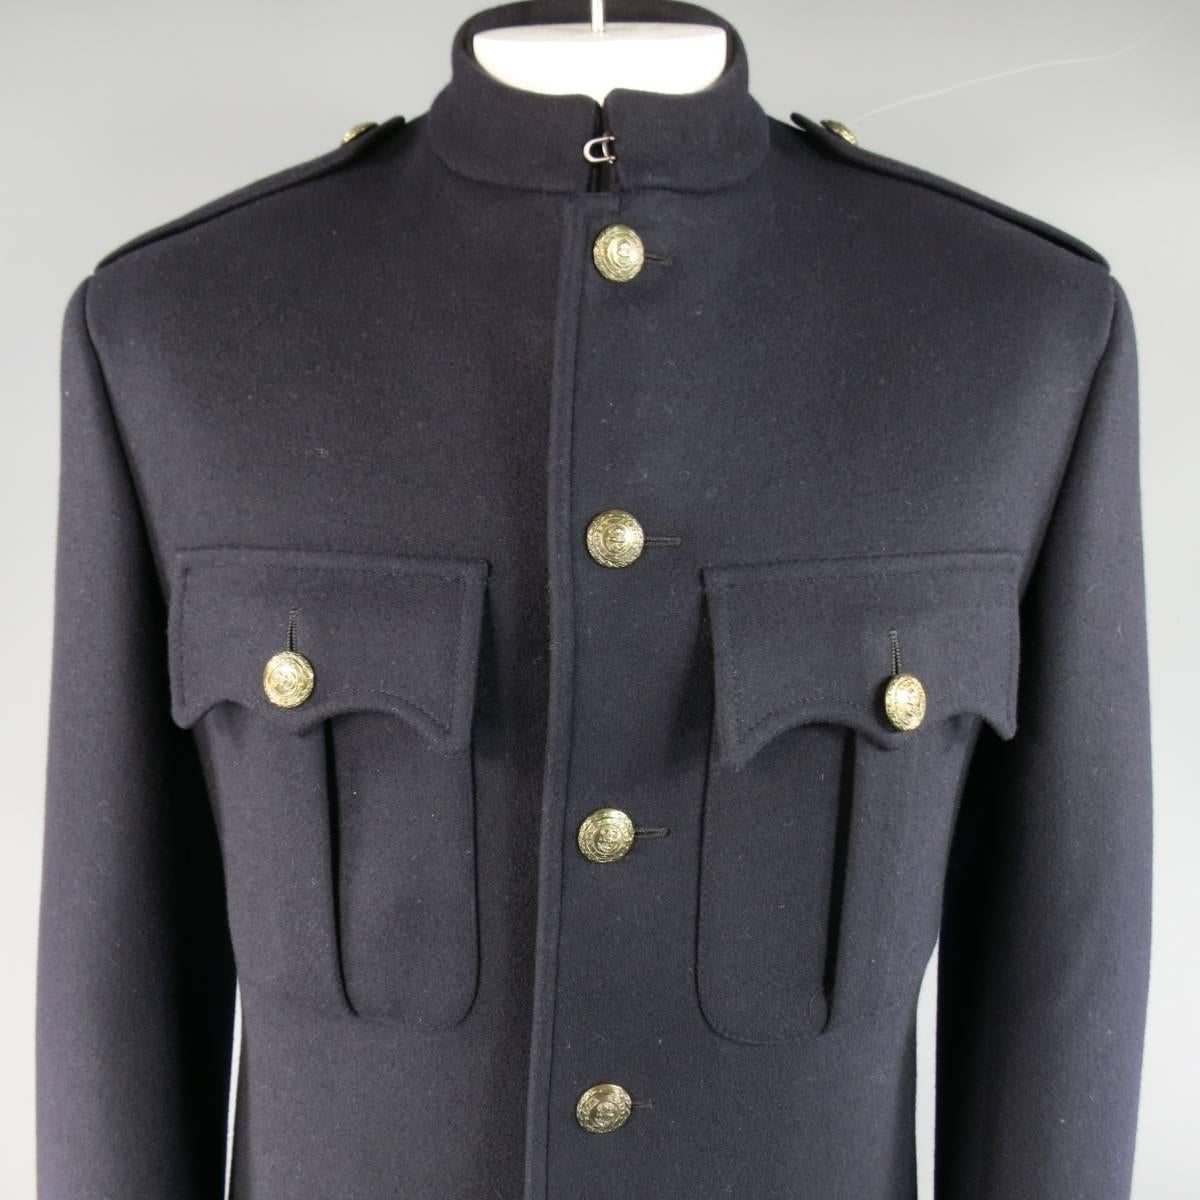 Classic RALPH LAUREN PURPLE LABEL military jacket in a deep Midnight navy blue wool cashmere blend and features a band collar with hook eye closure, double patch flap breast pockets, epaulets, and muted gold tone anchor engraved buttons. Missing